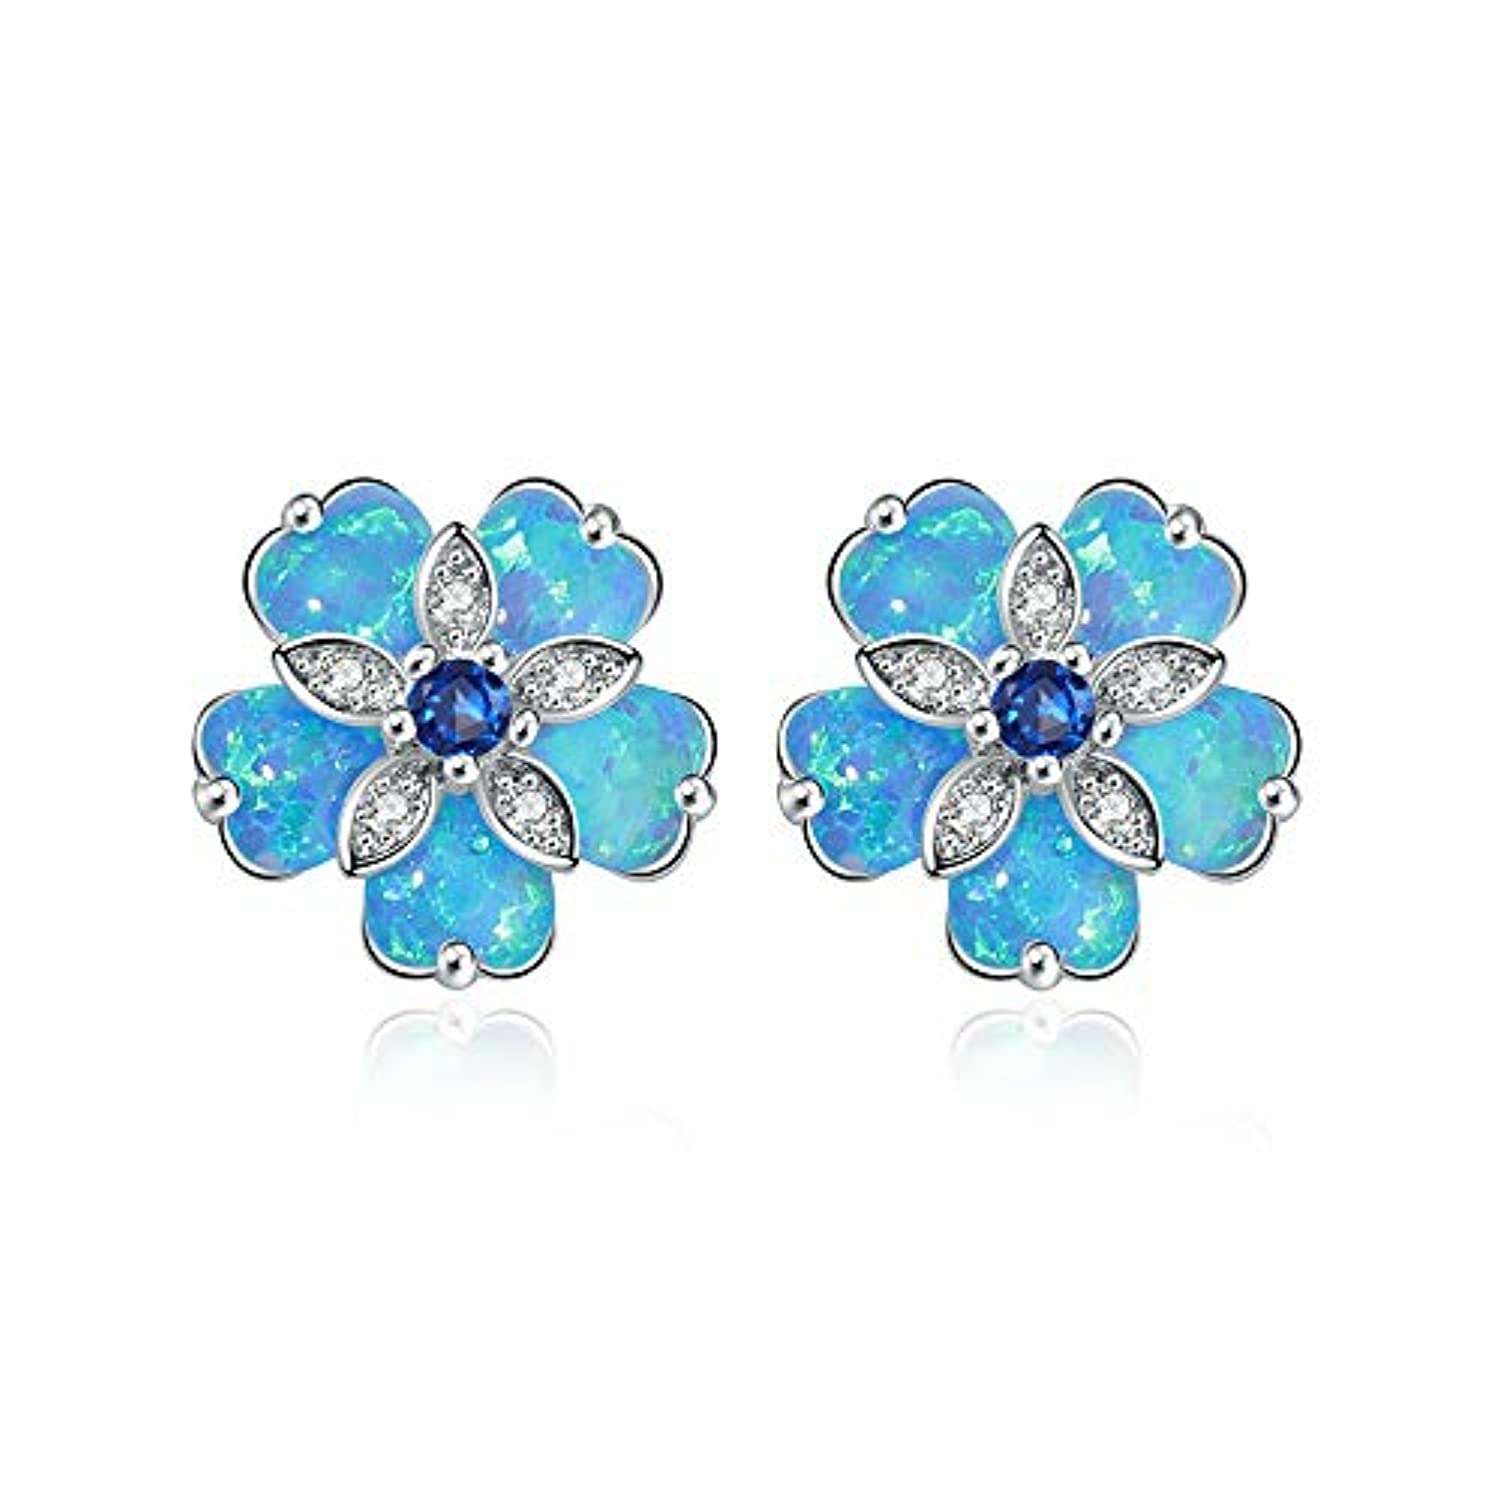 Flower Opal Earrings Stud,Gold Plated or Rhodium Plated Hypoallergenic